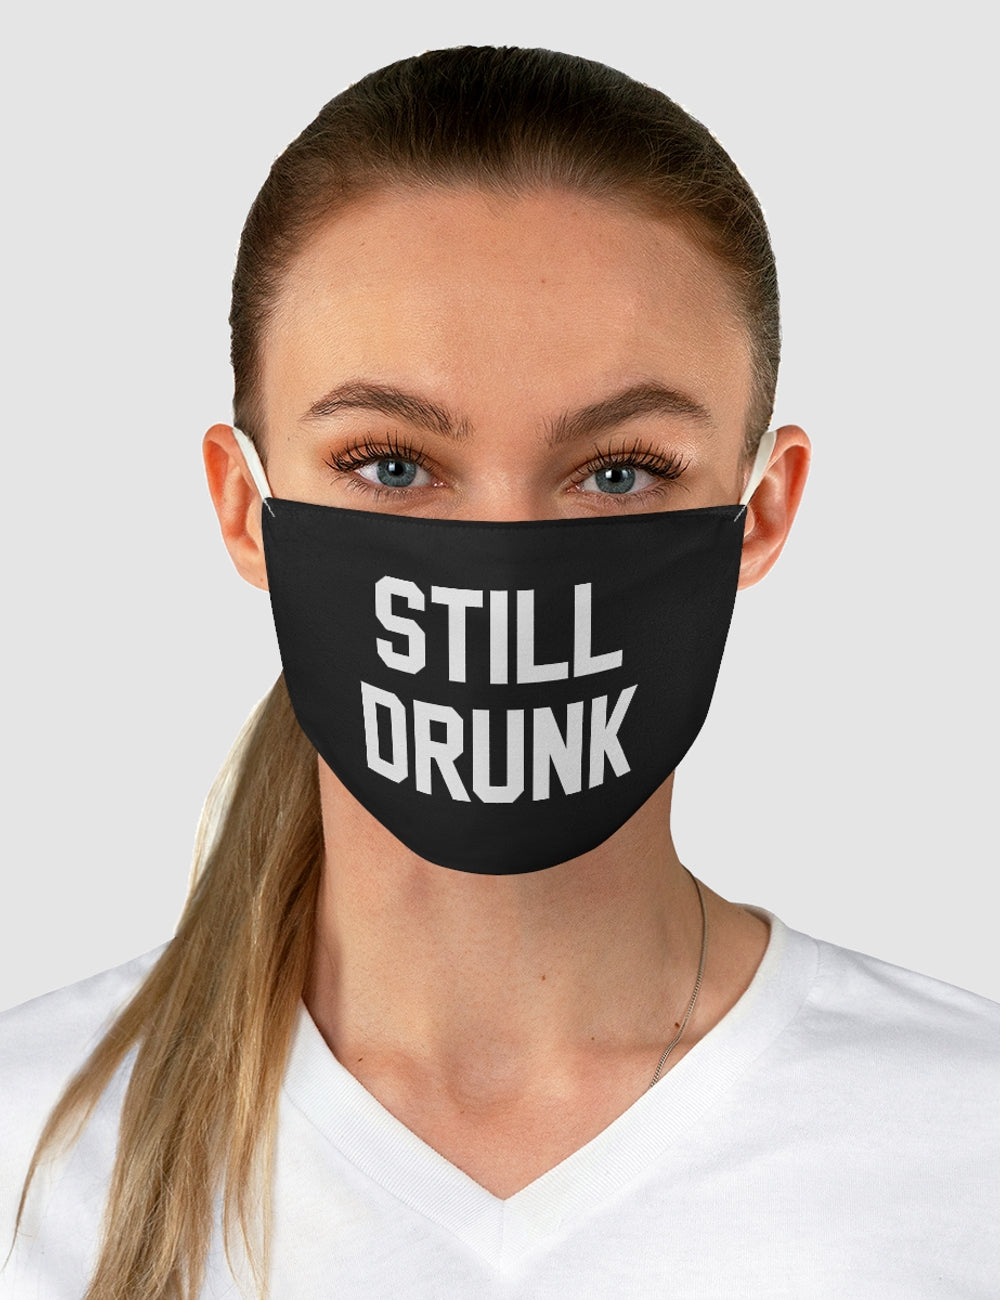 Still Drunk | Two-Layer Polyester Fabric Face Mask OniTakai